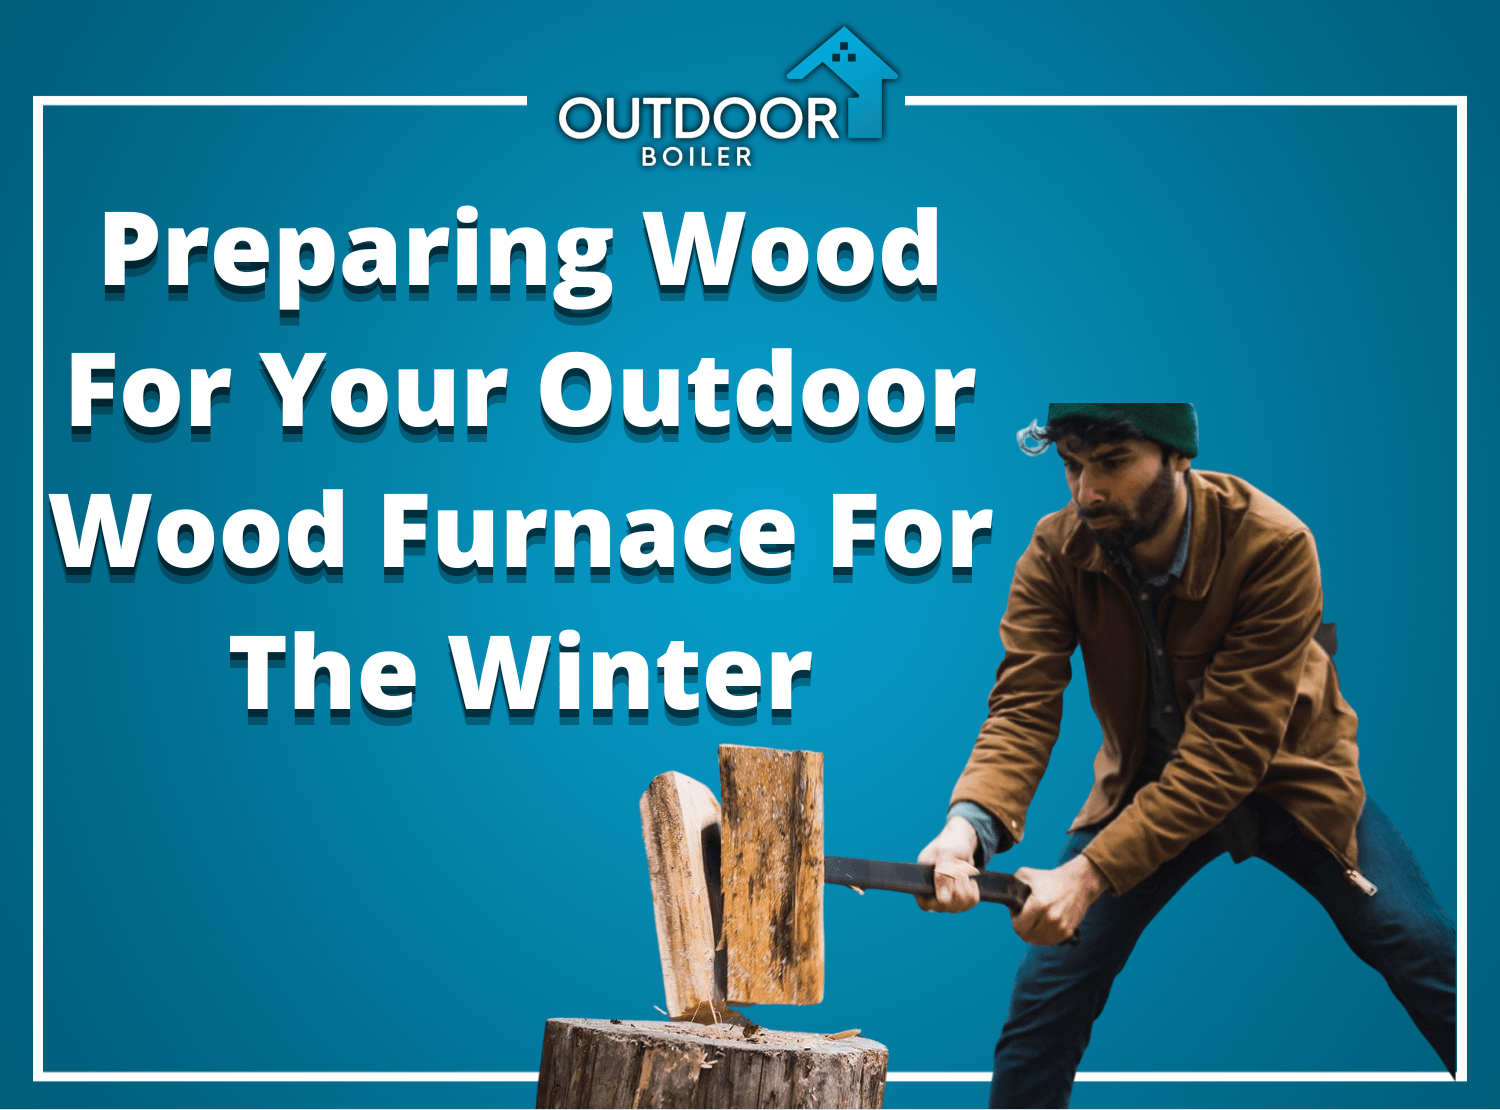 Let's Learn How To Make Your Outdoor Wood Furnace More Efficient